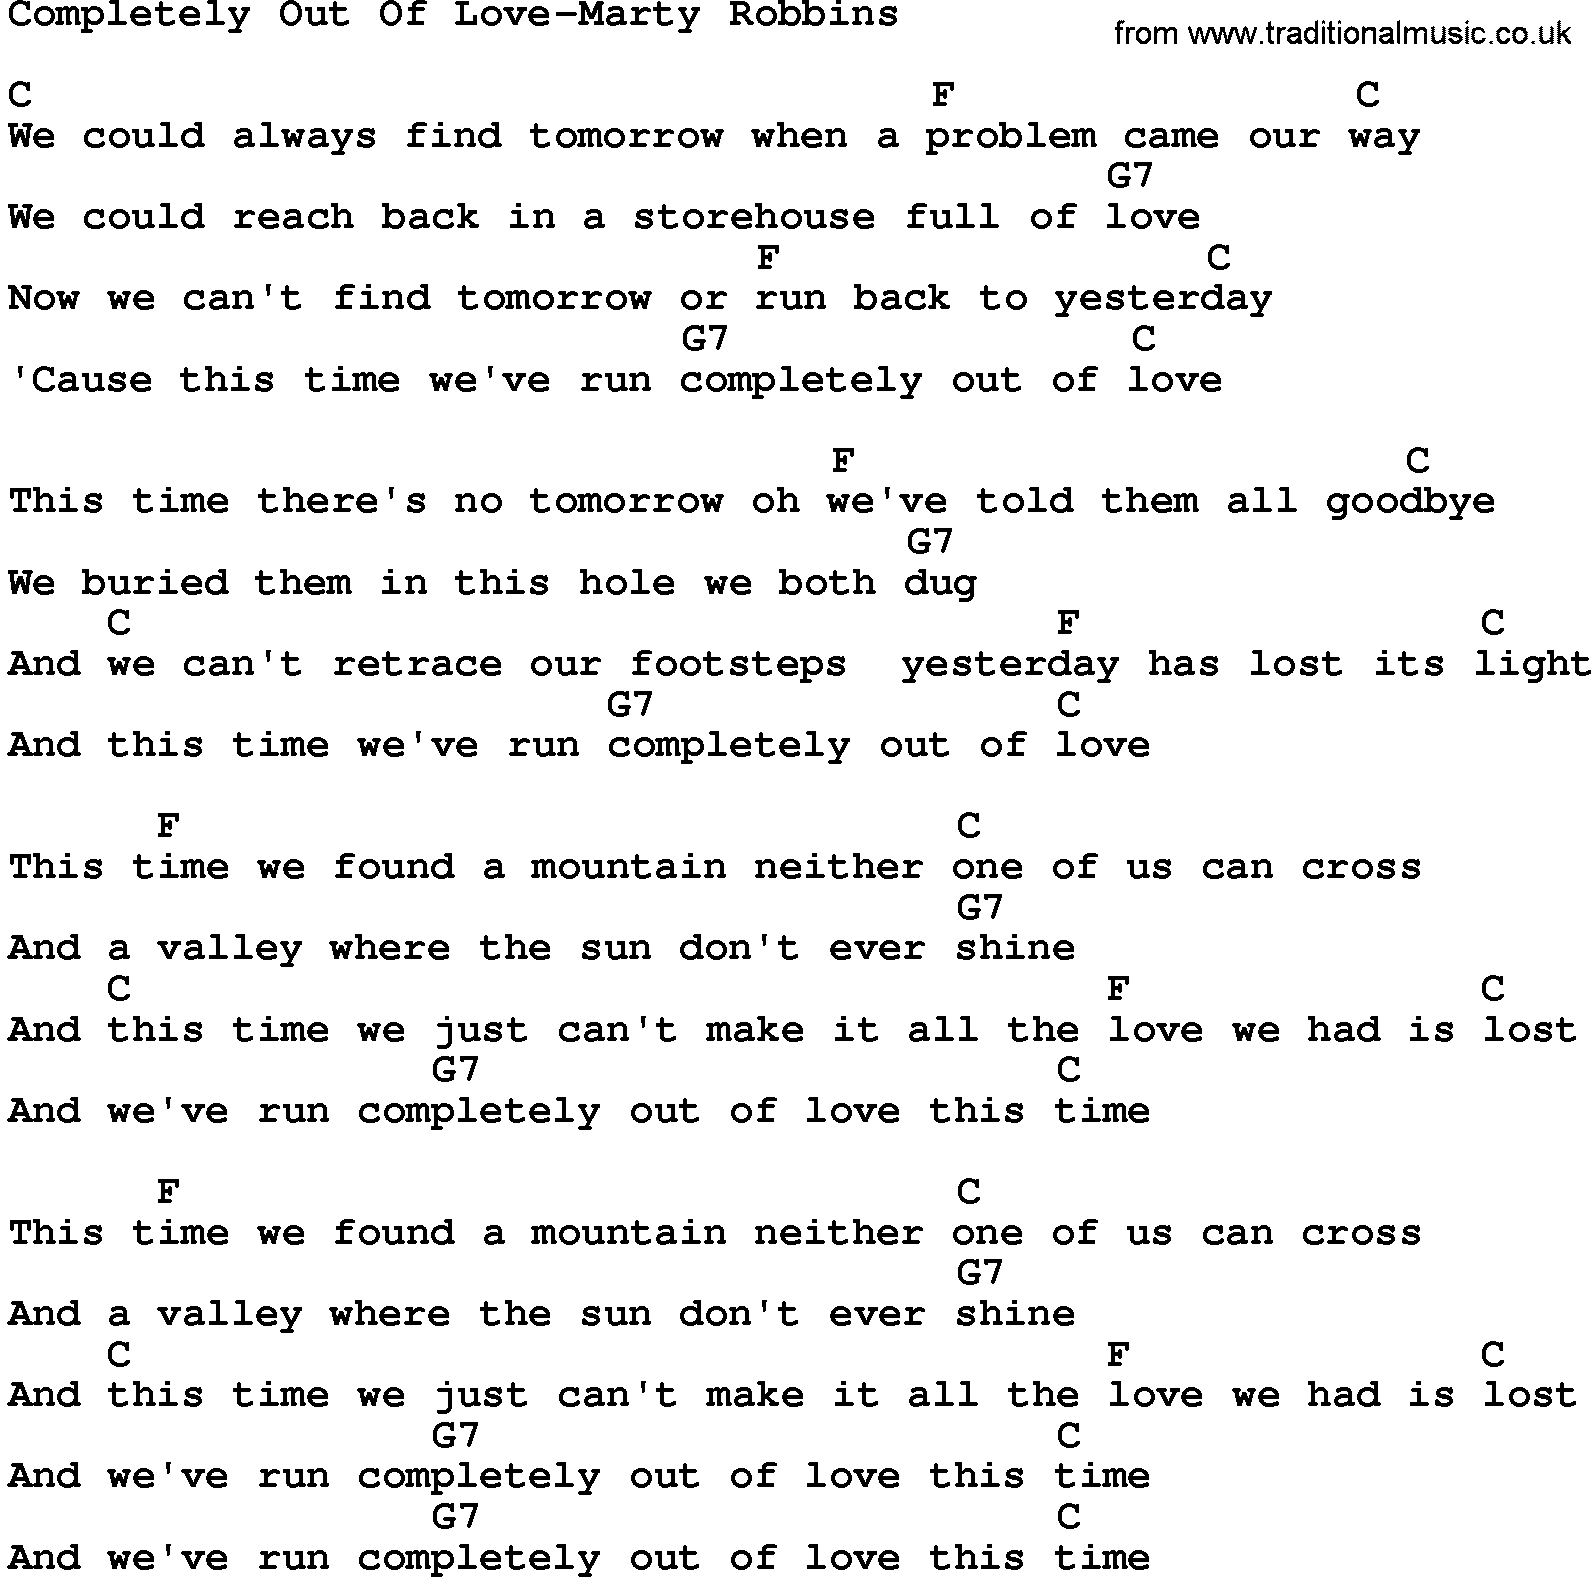 Country music song: Completely Out Of Love-Marty Robbins lyrics and chords